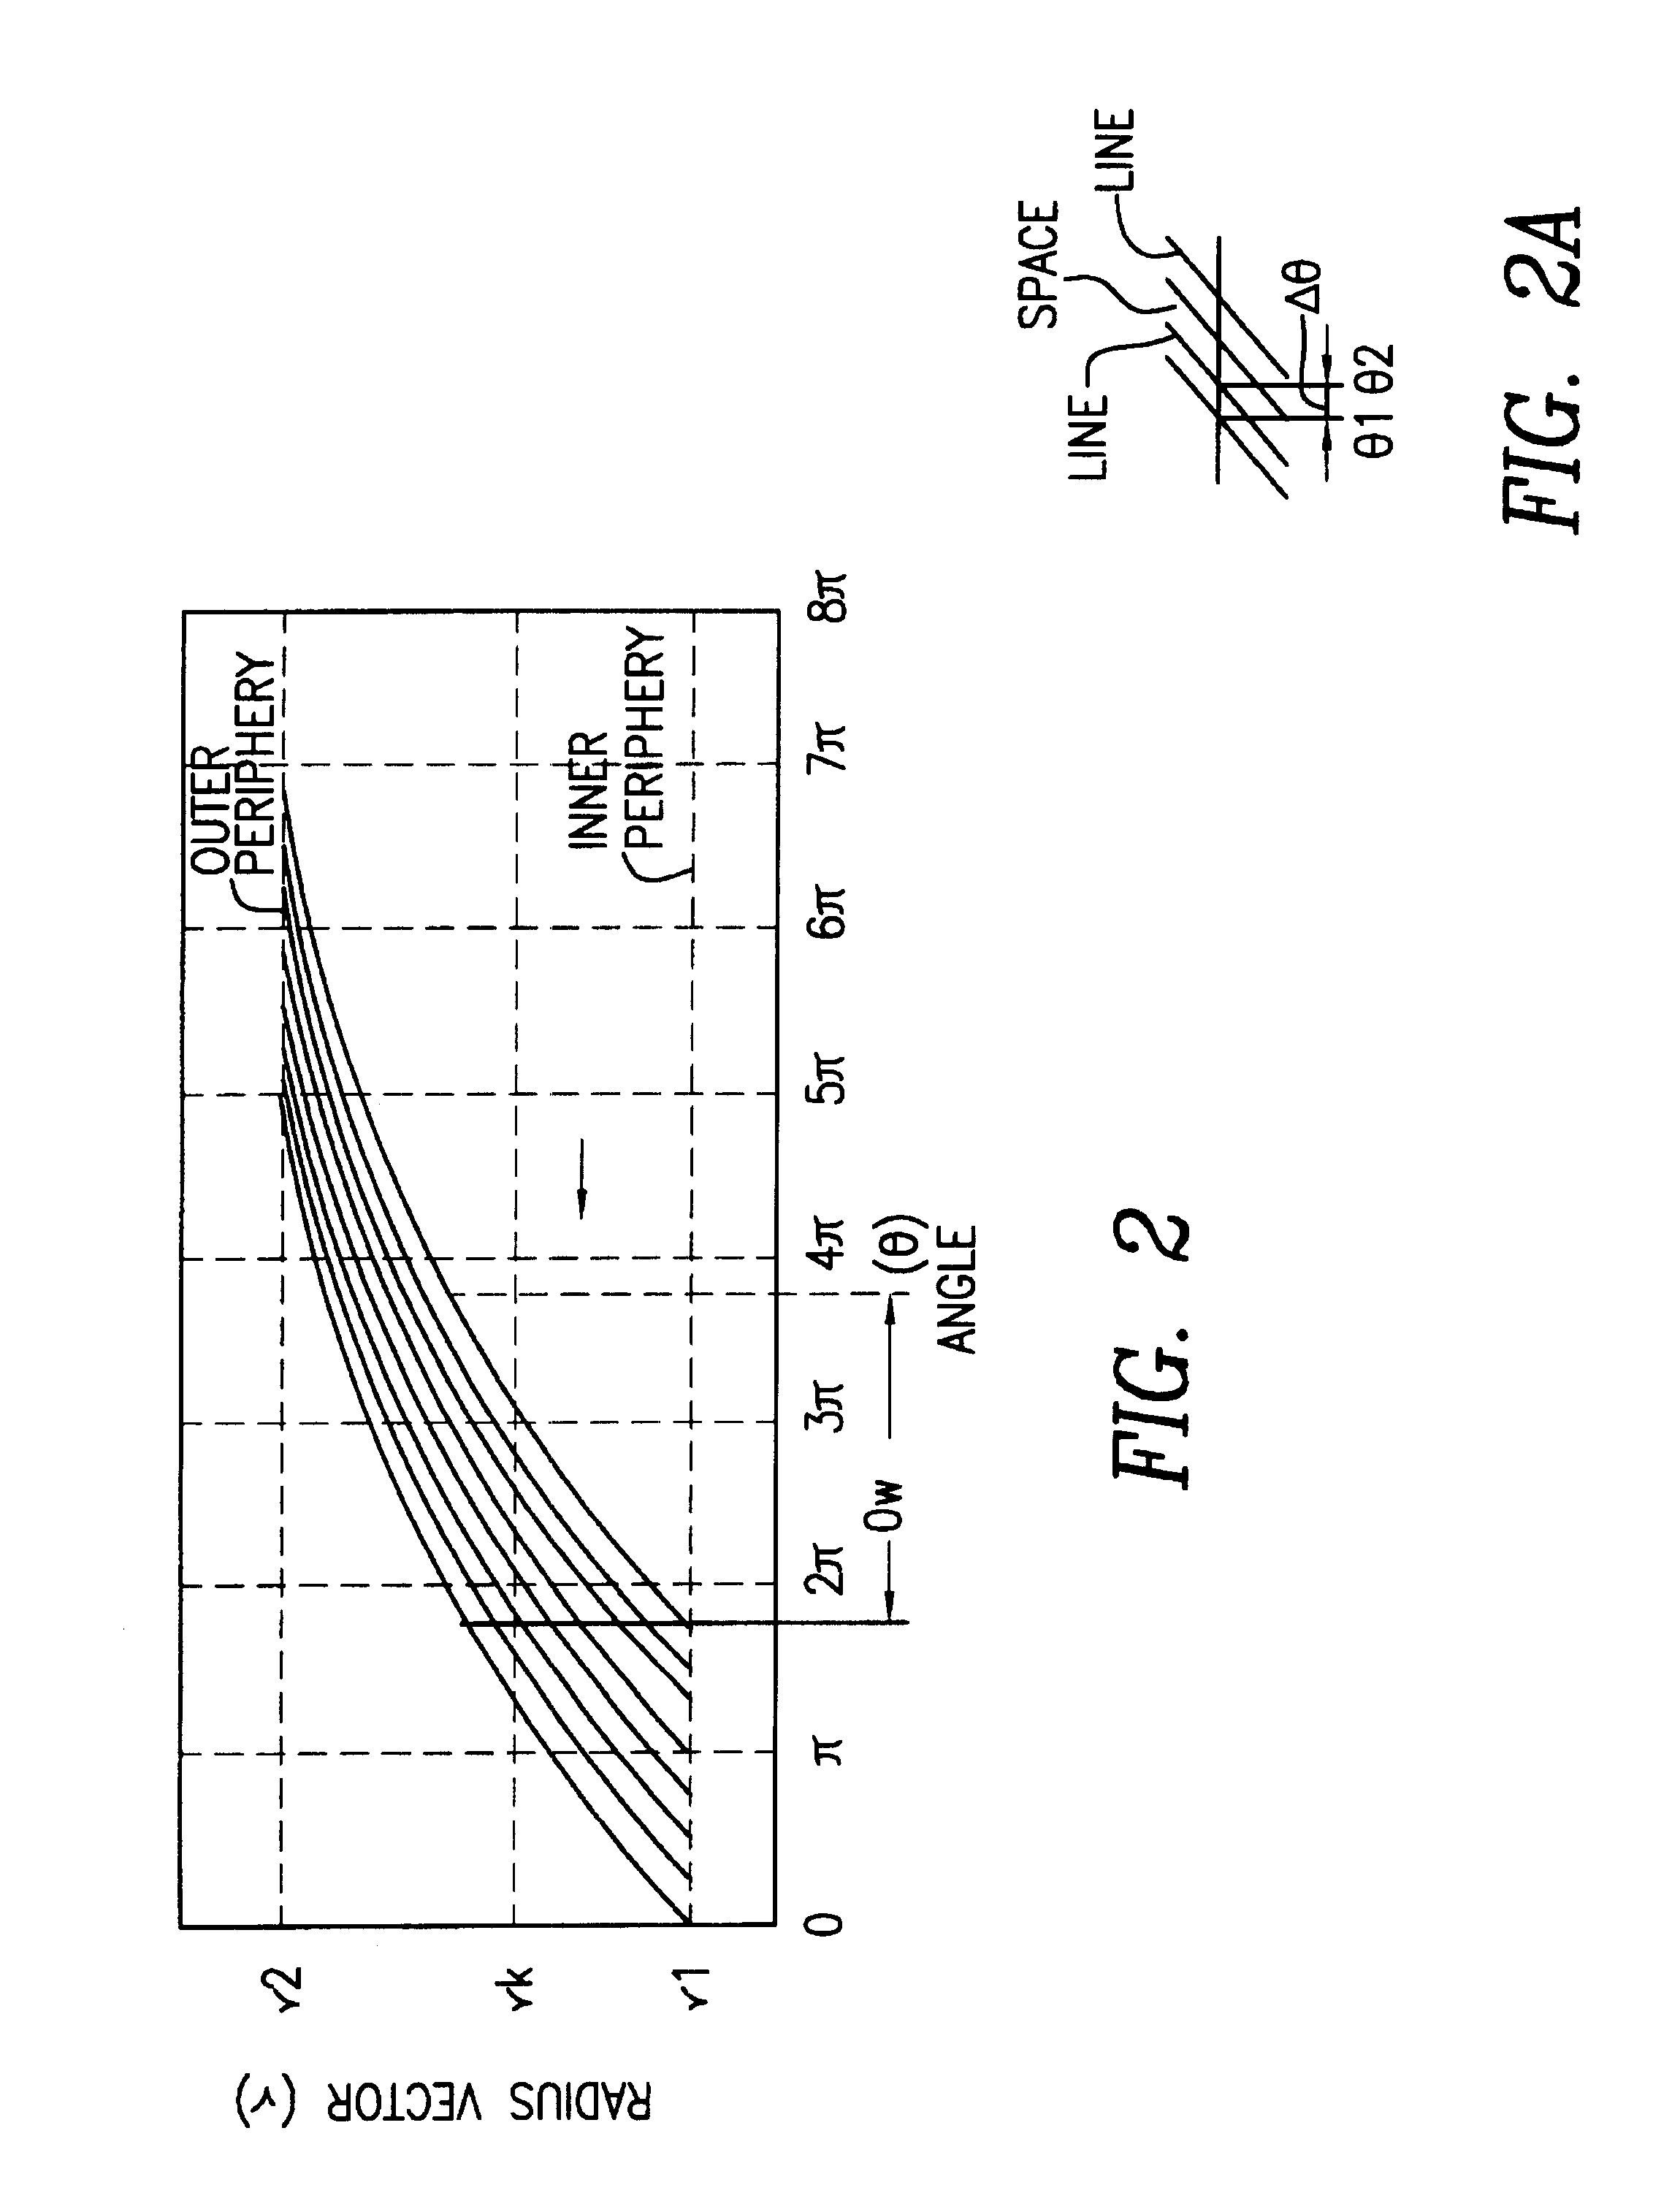 Resonator, filter, duplexer, and communication device